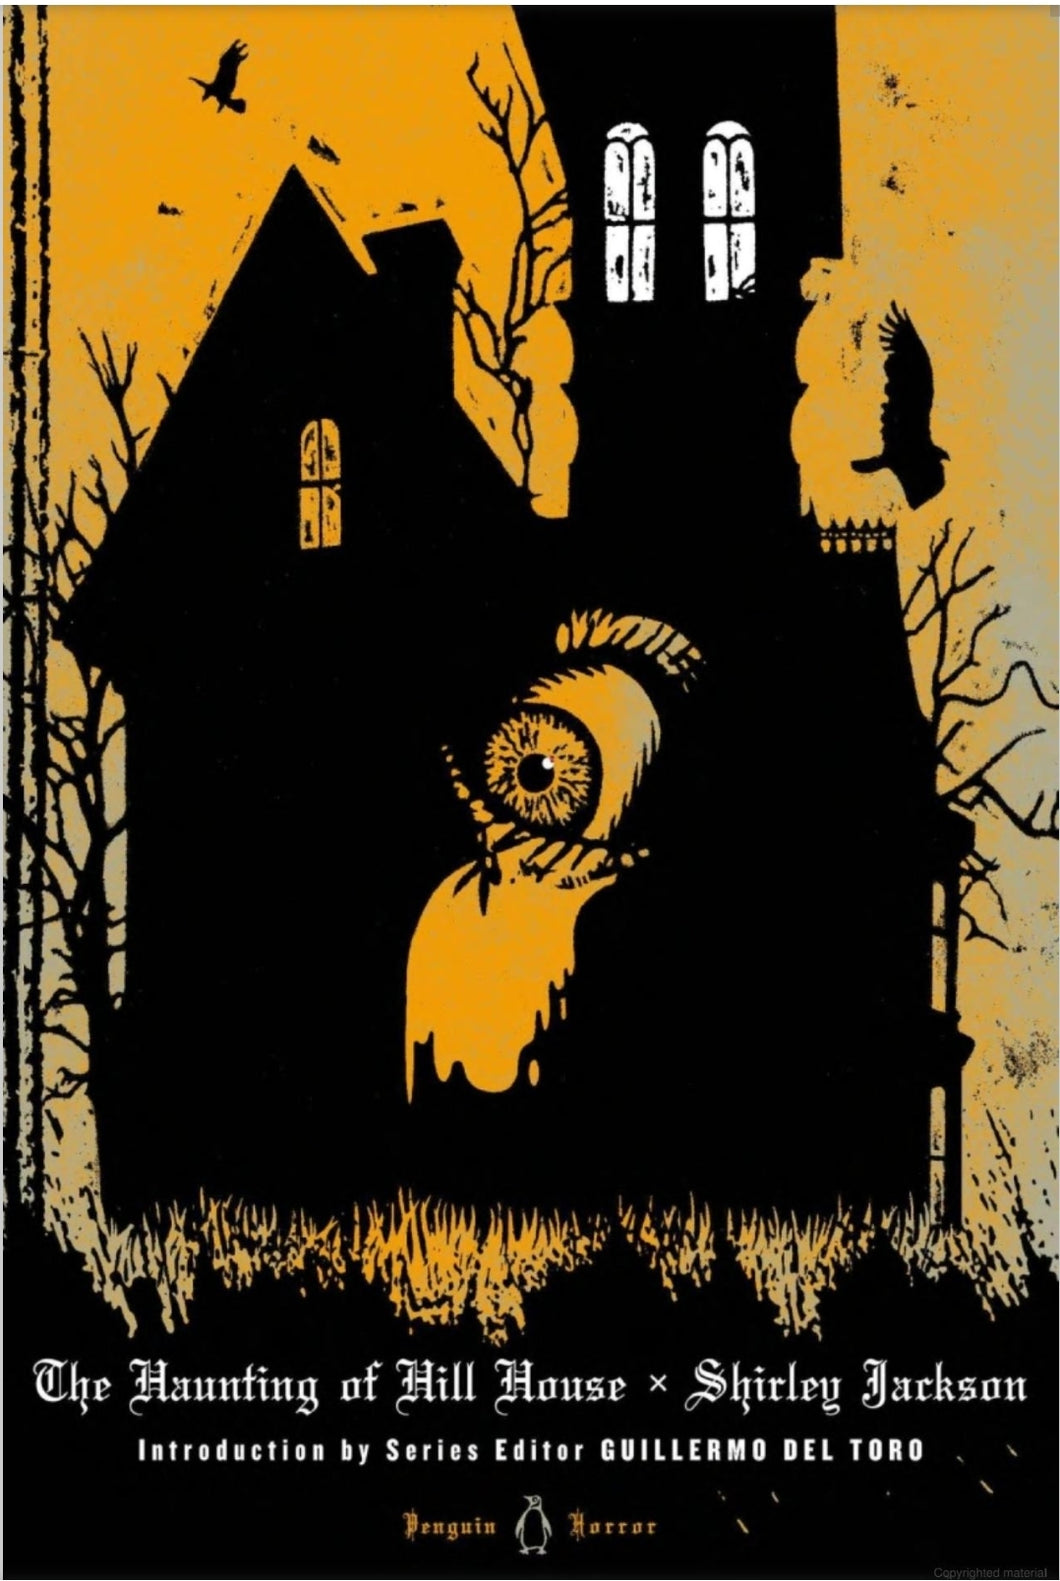 The Haunting of Hill House (Penguin Classics) Hardcover